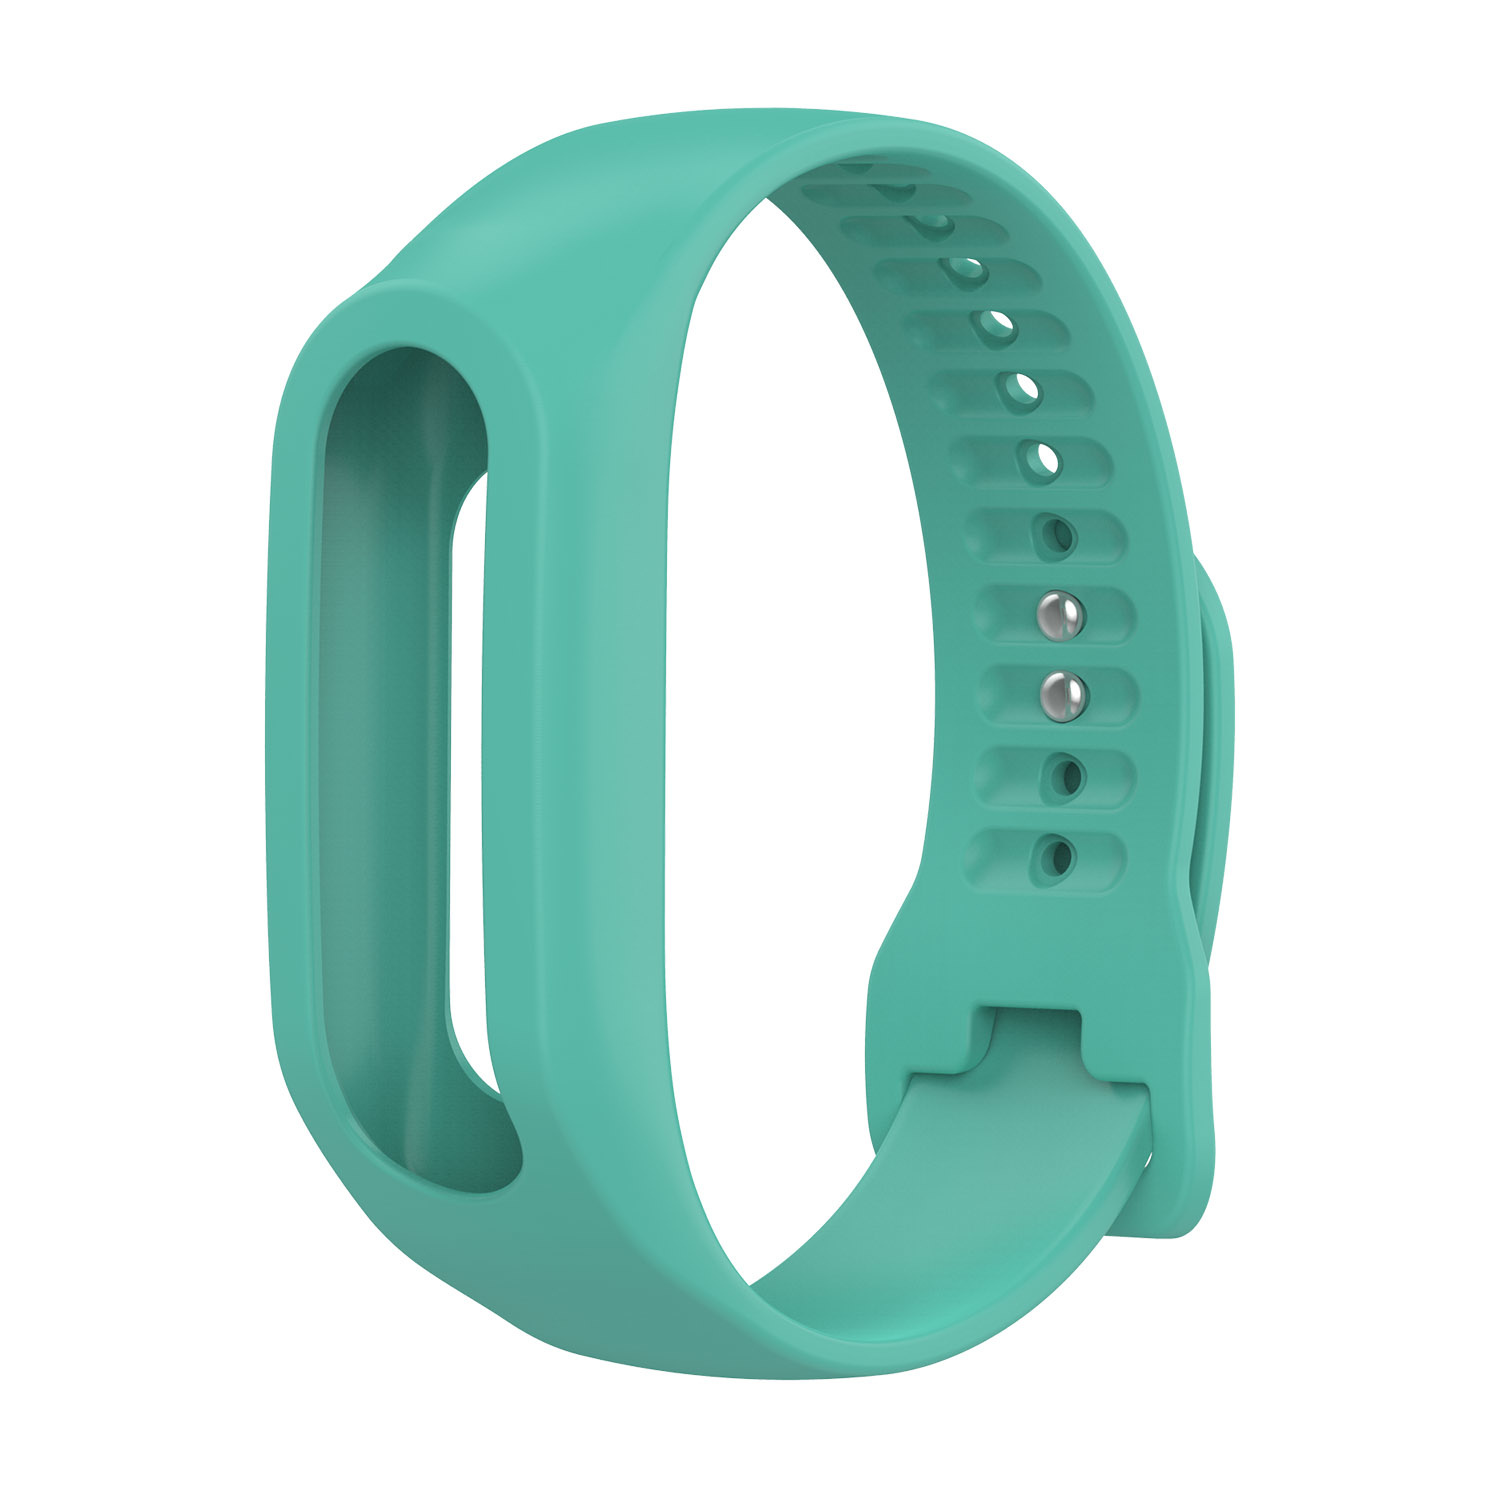 Tomtom Touch Sport Strap - Teal